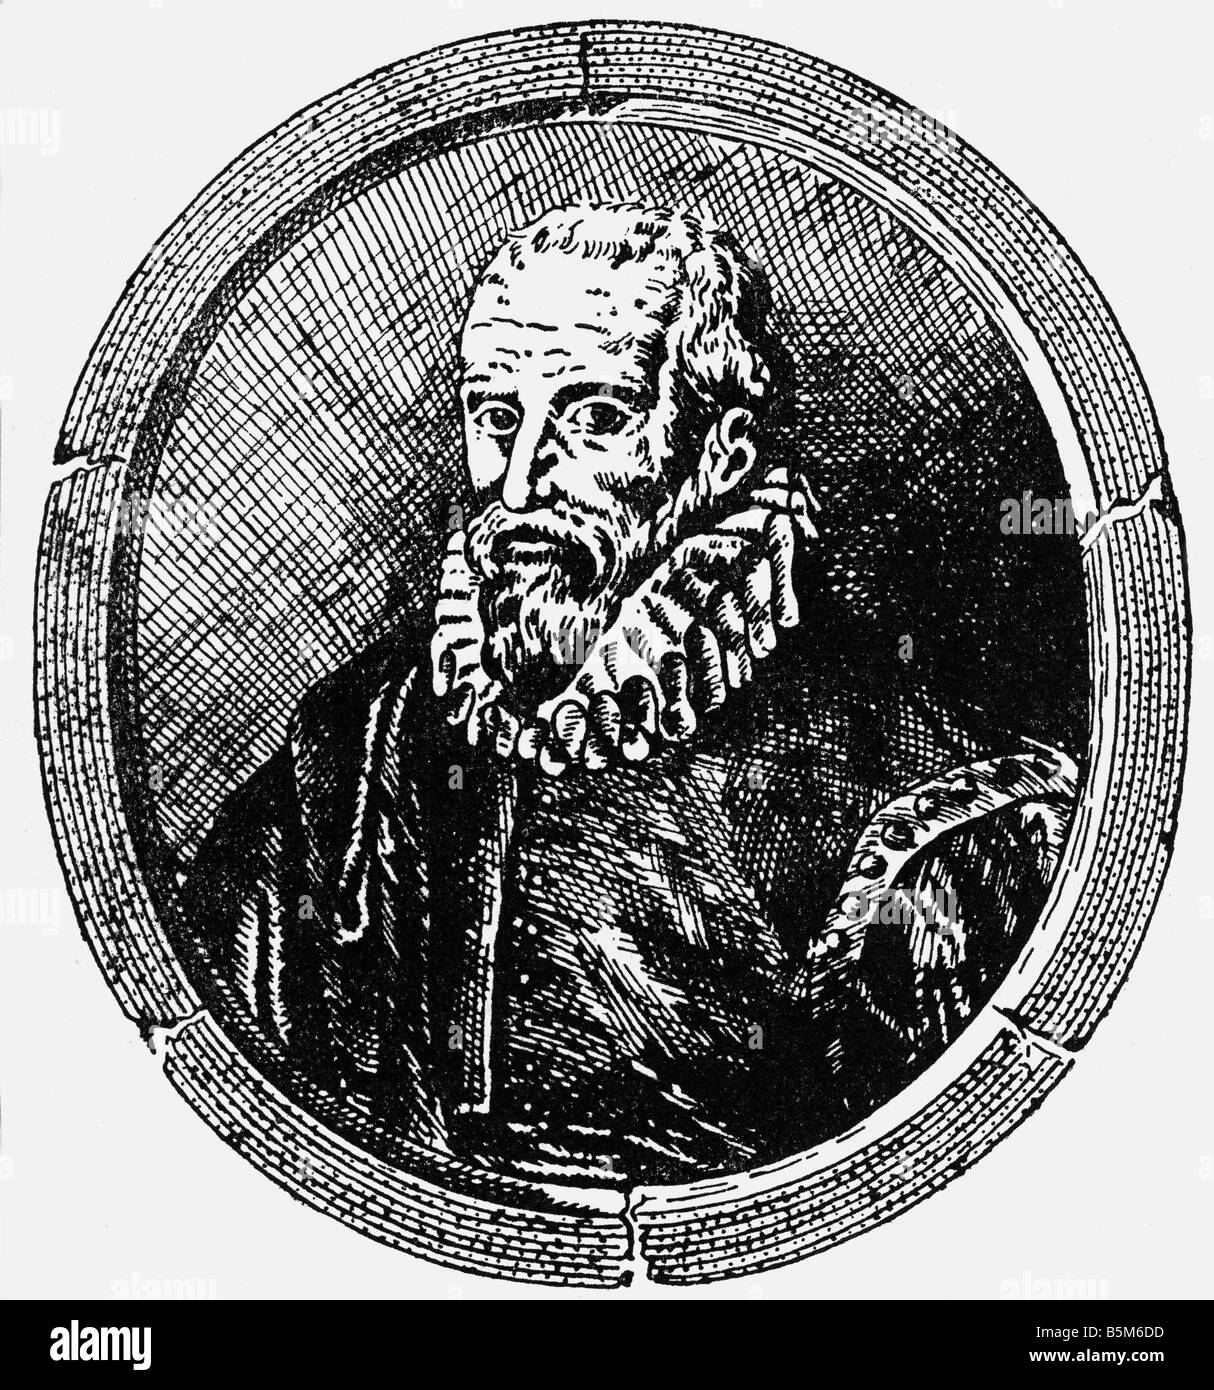 Pare, Ambroise, um 1510 - 20. 12.1590, French physician, portrait, wood engraving, 19th century,  , Stock Photo